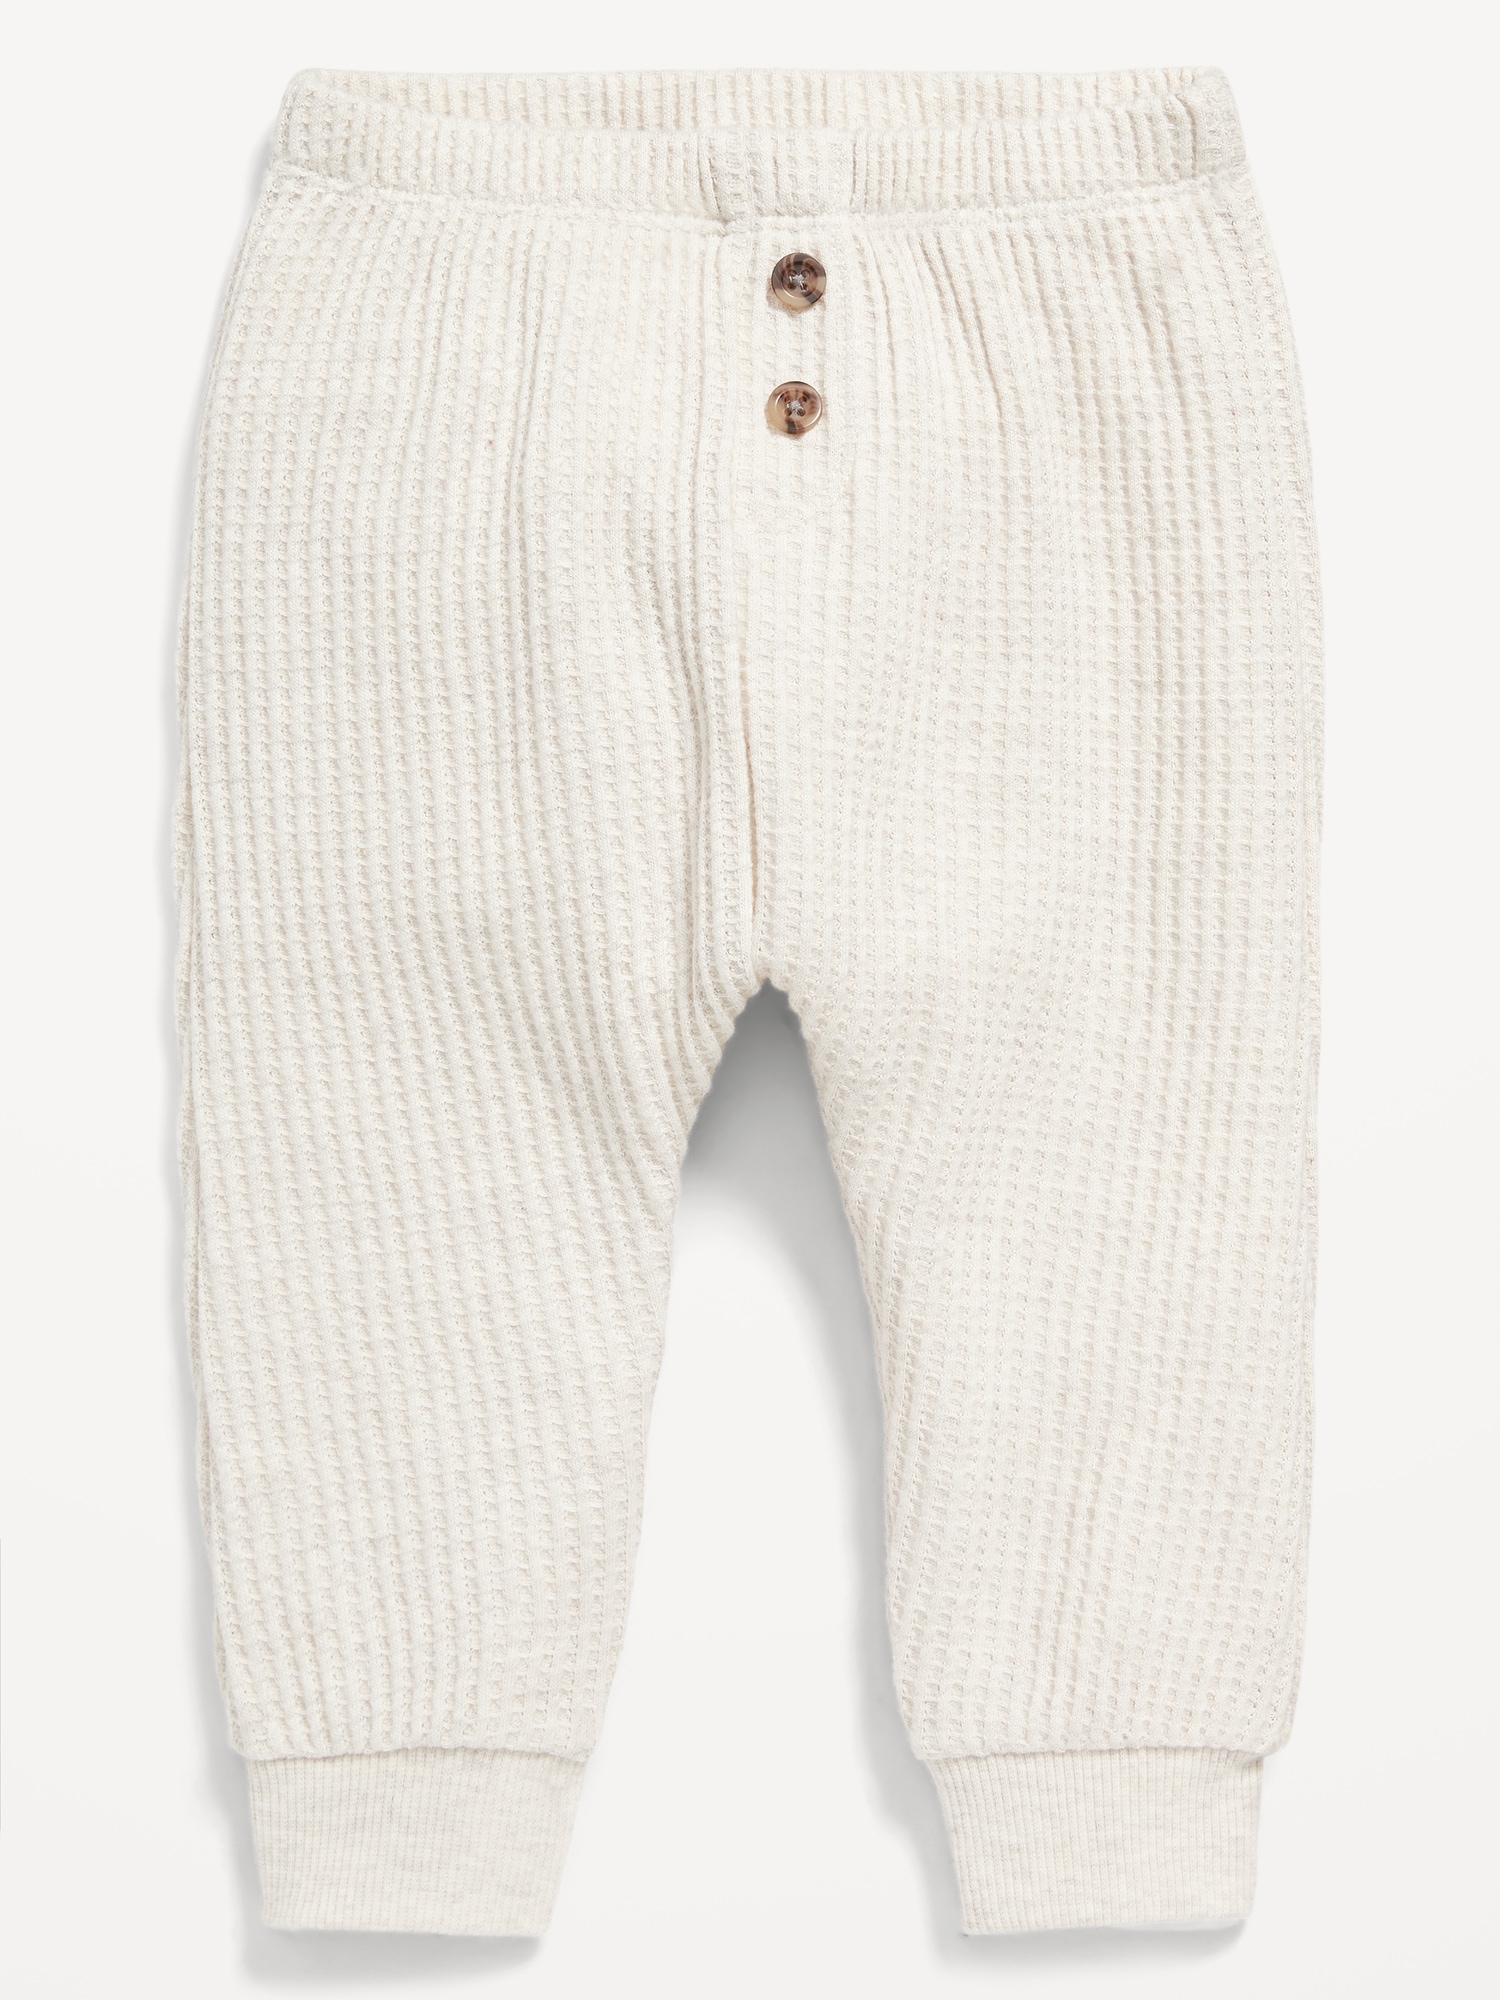 Unisex Thermal-Knit Buttoned Jogger Pants for Baby